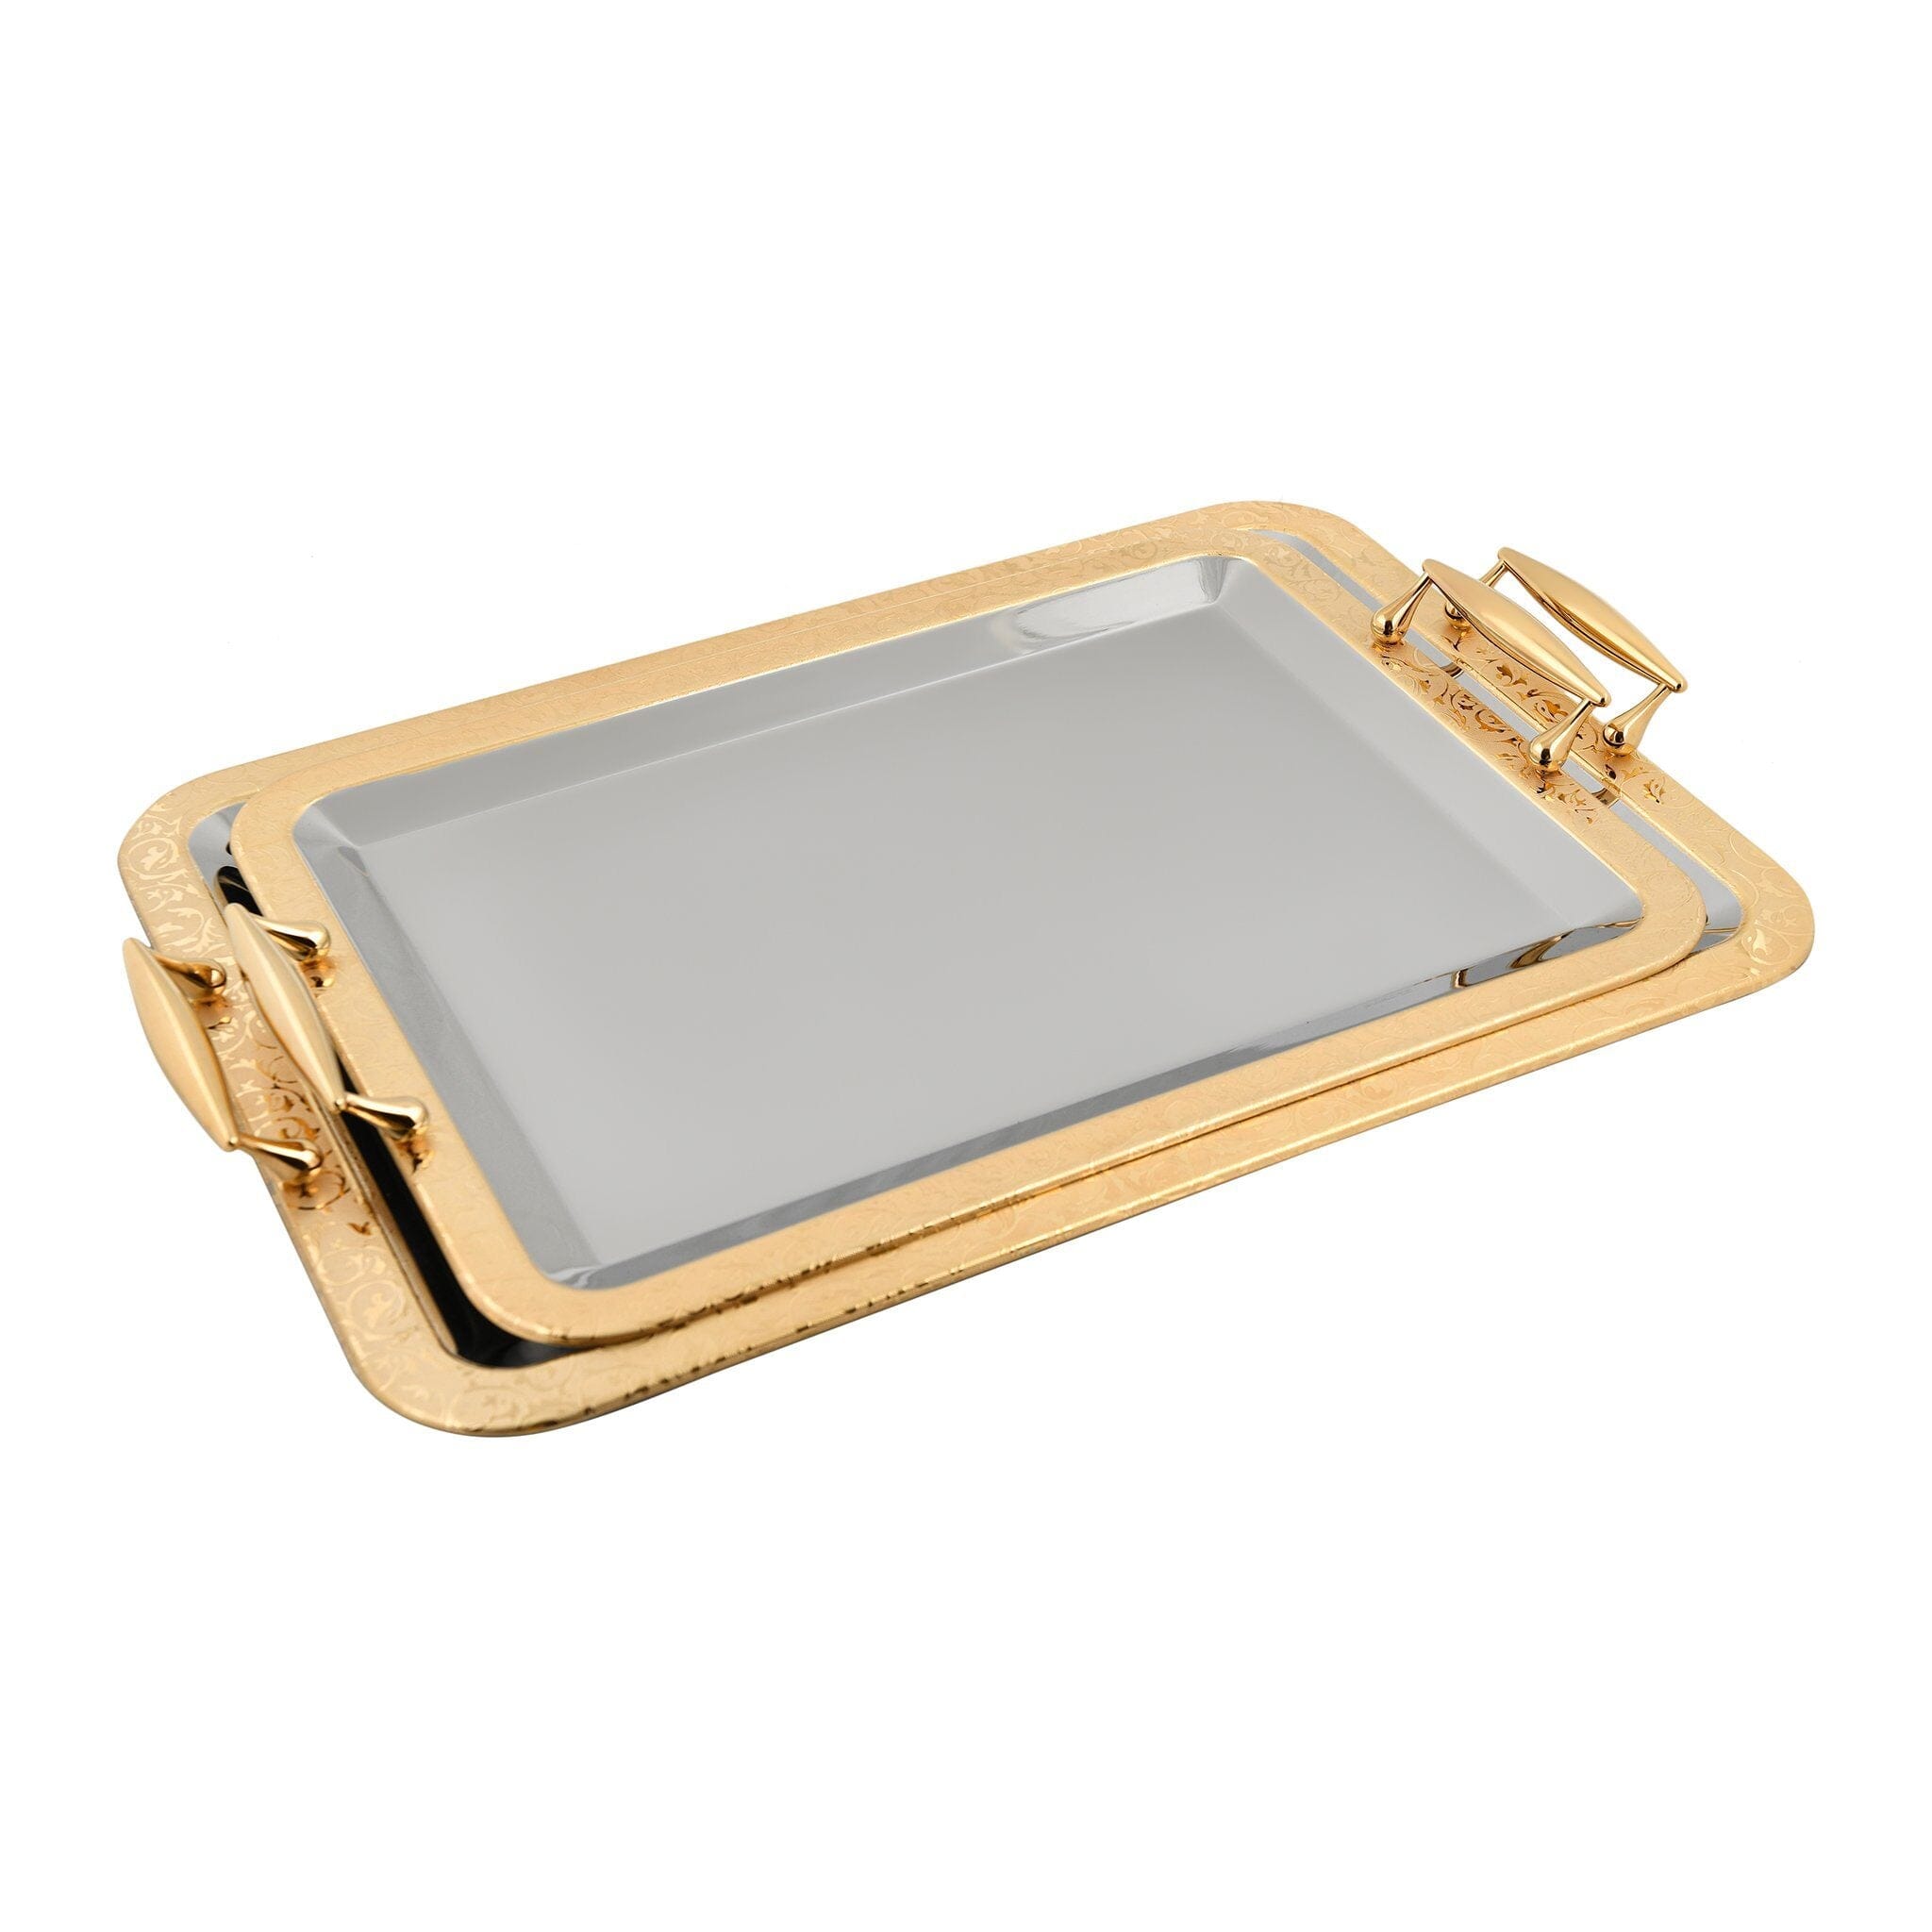 Elegant Gioiel - Rectangular Tray Set with Handles 2 Pieces - Gold - Stainless Steel 18/10 - 75000184